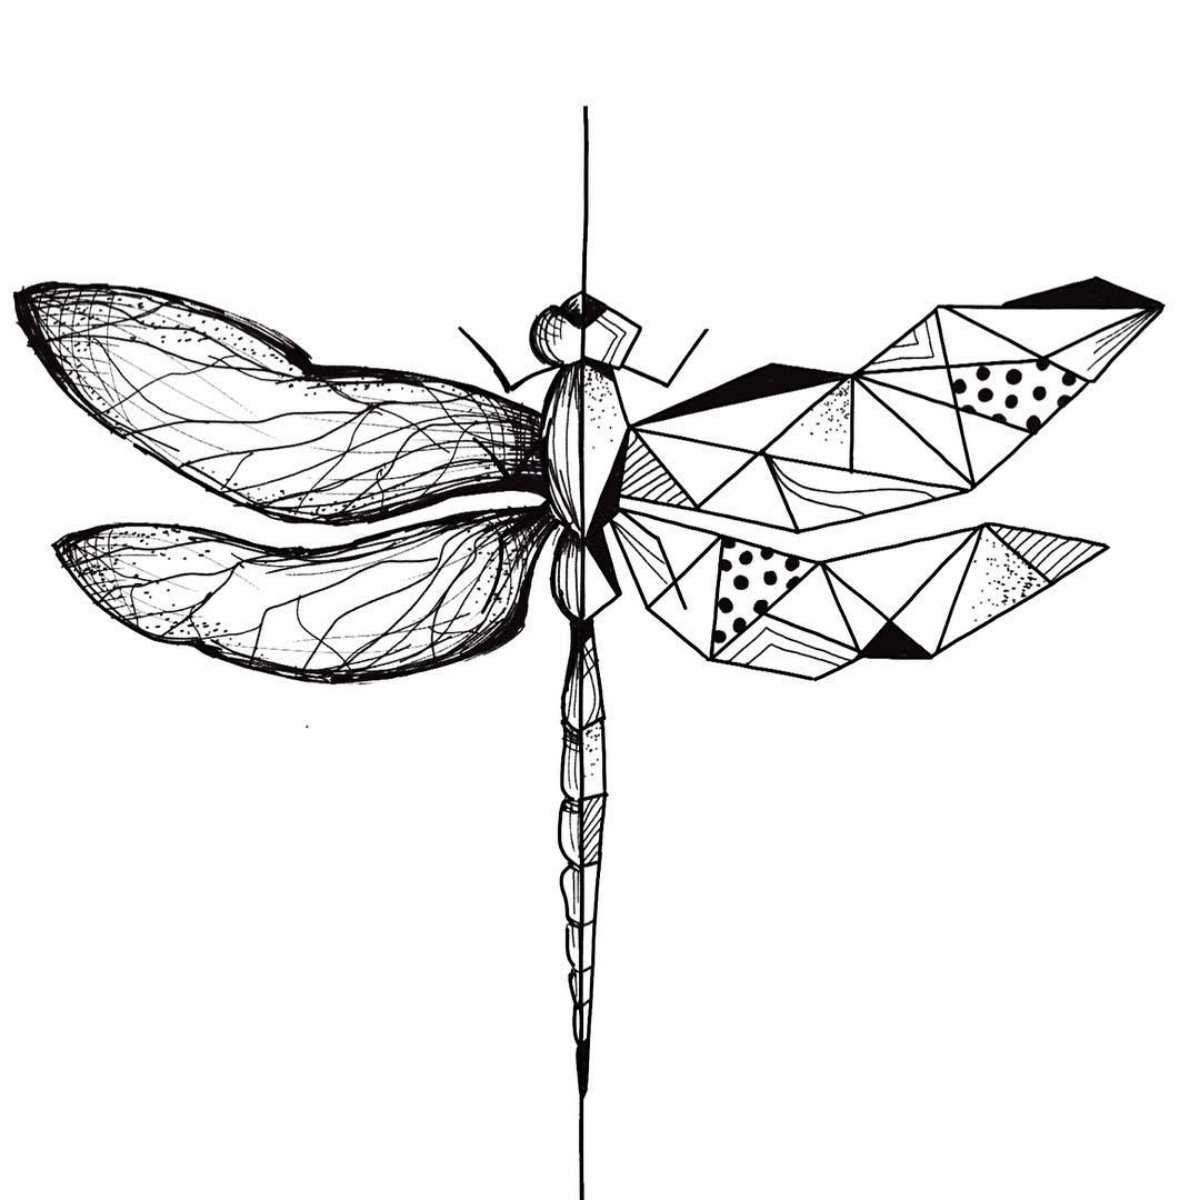 dragonfly drawing geometric shapes